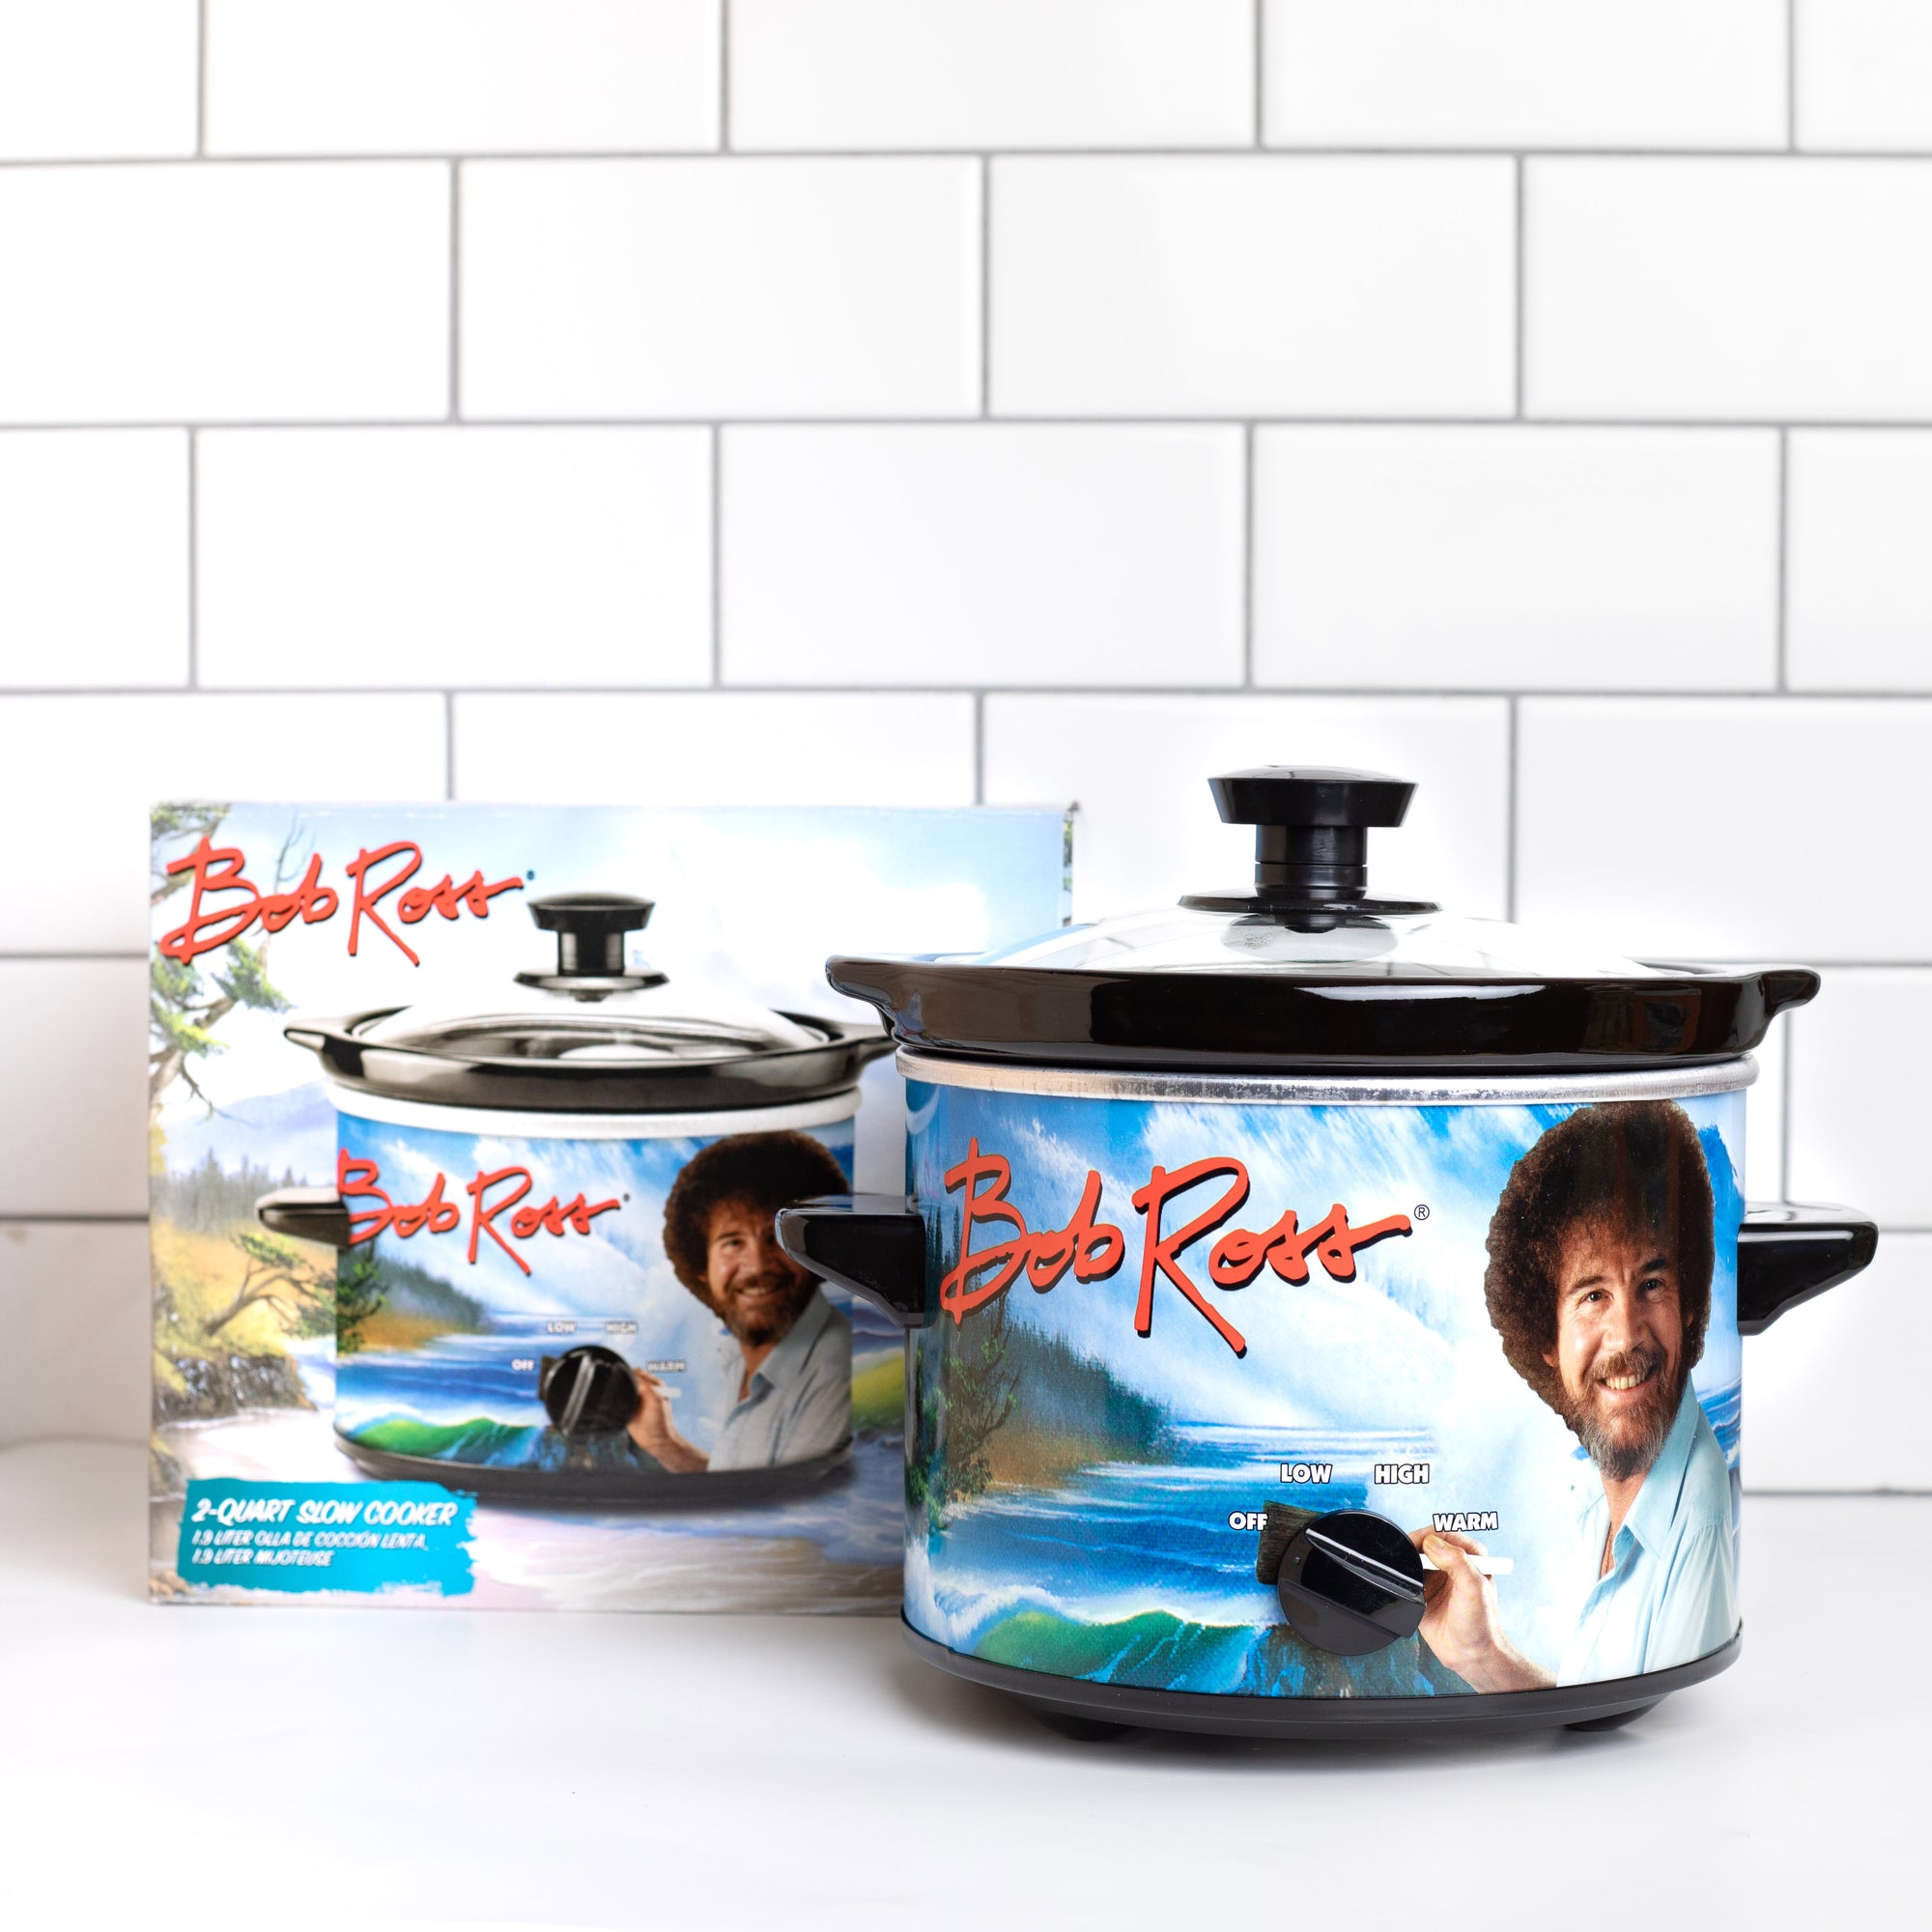 Bob Ross slow cooker next to box